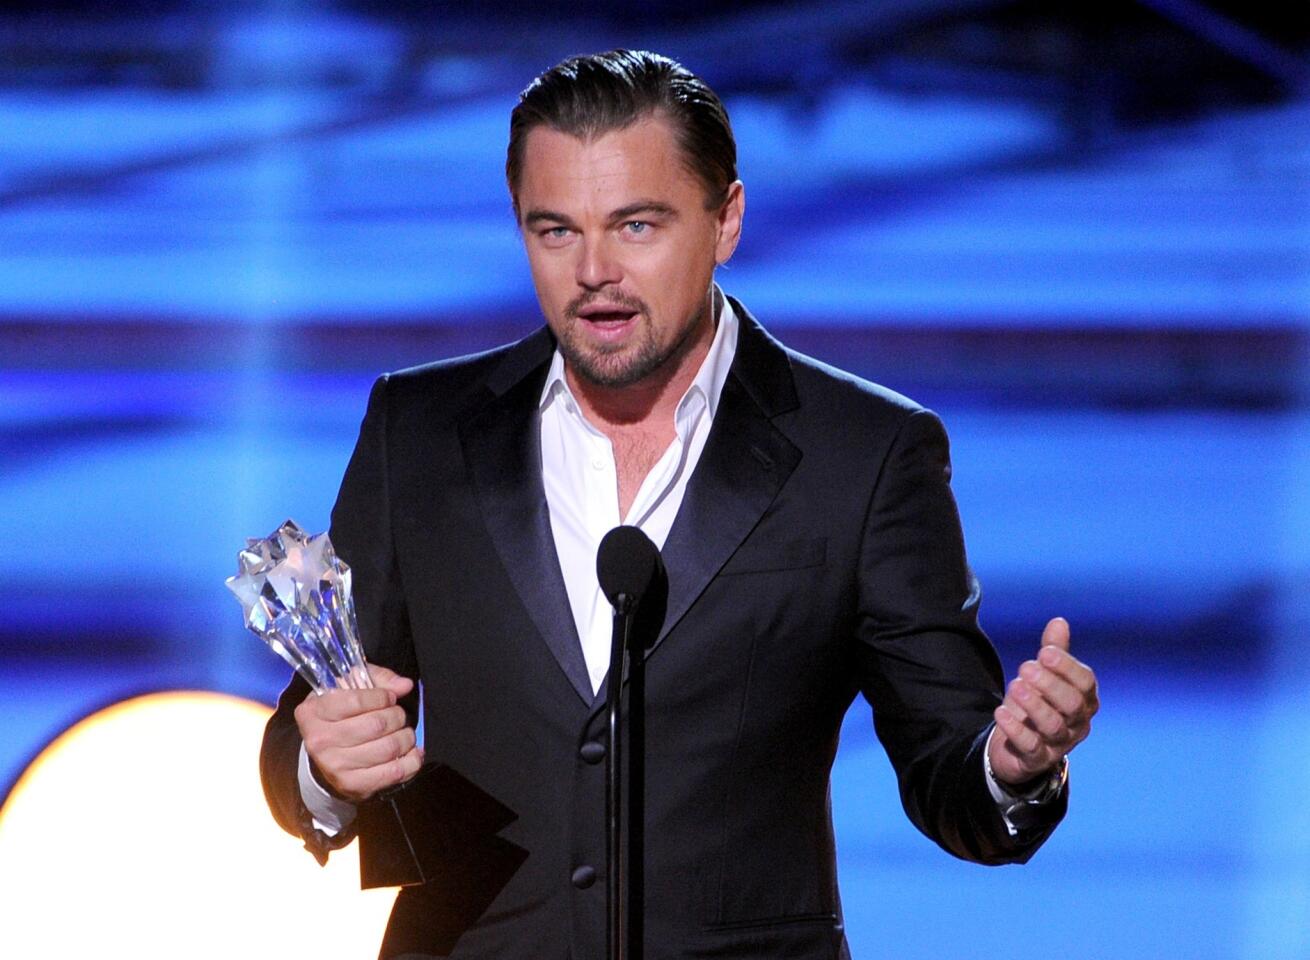 Actor Leonardo DiCaprio accepts the award for actor in a comedy for his work in "The Wolf of Wall Street."